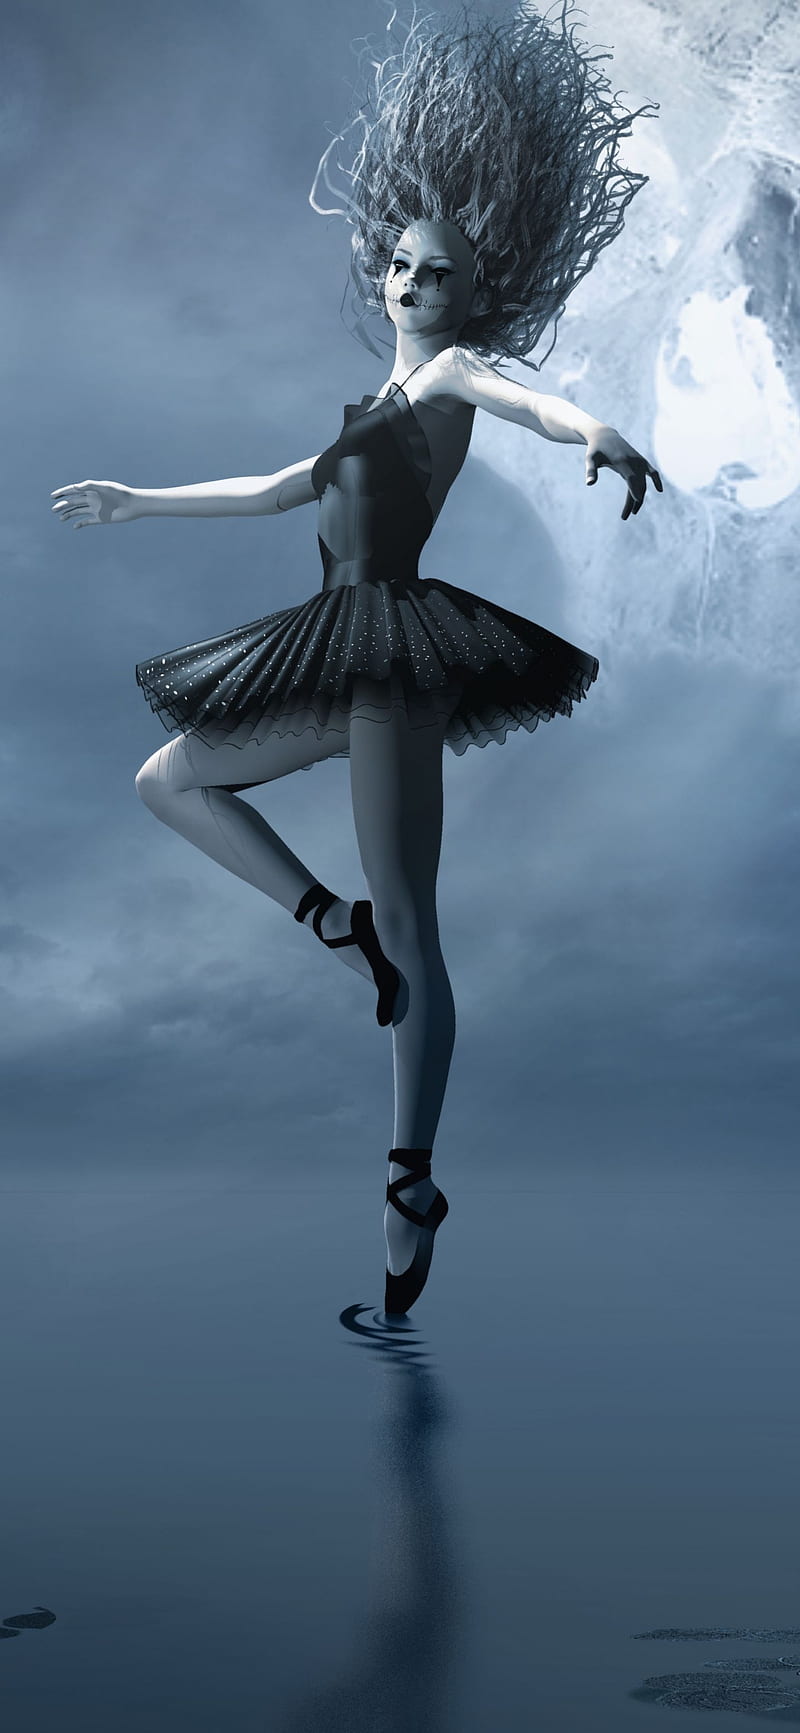 50 Ballet Wallpaper Ideas for iPhone  The Mood Guide